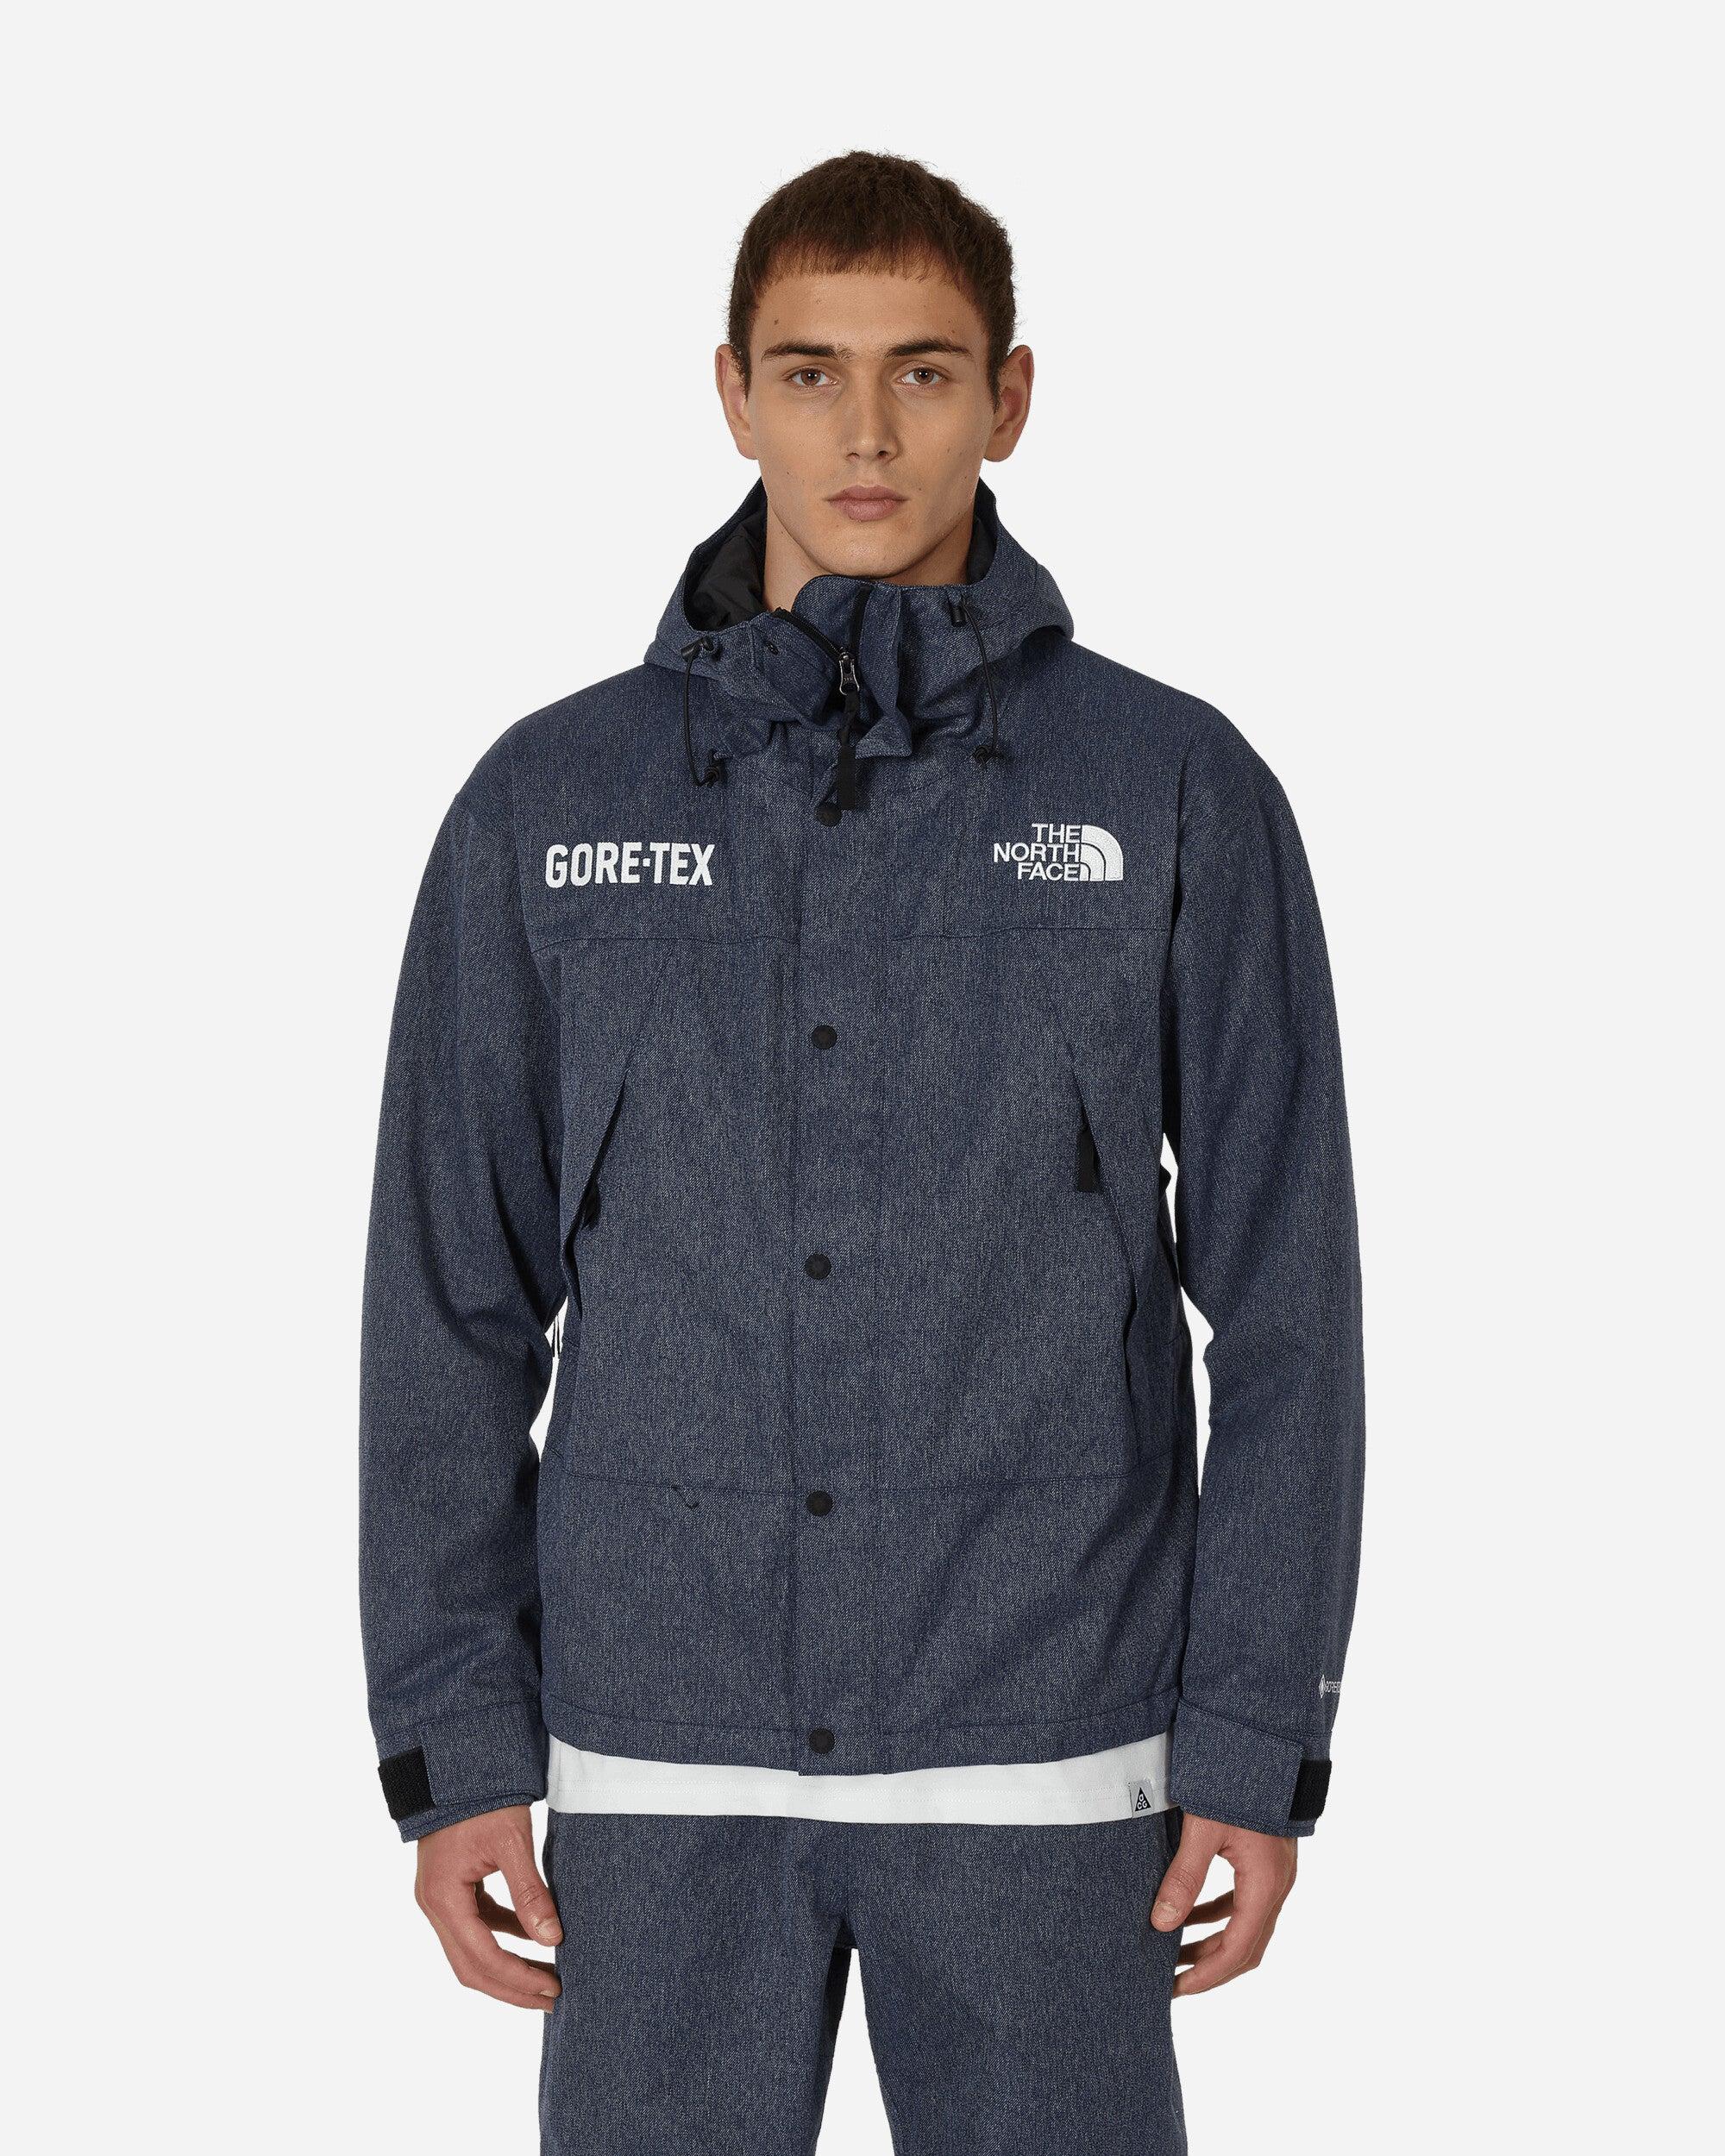 The North Face Gtx Mountain Jacket Denim Blue for Men | Lyst